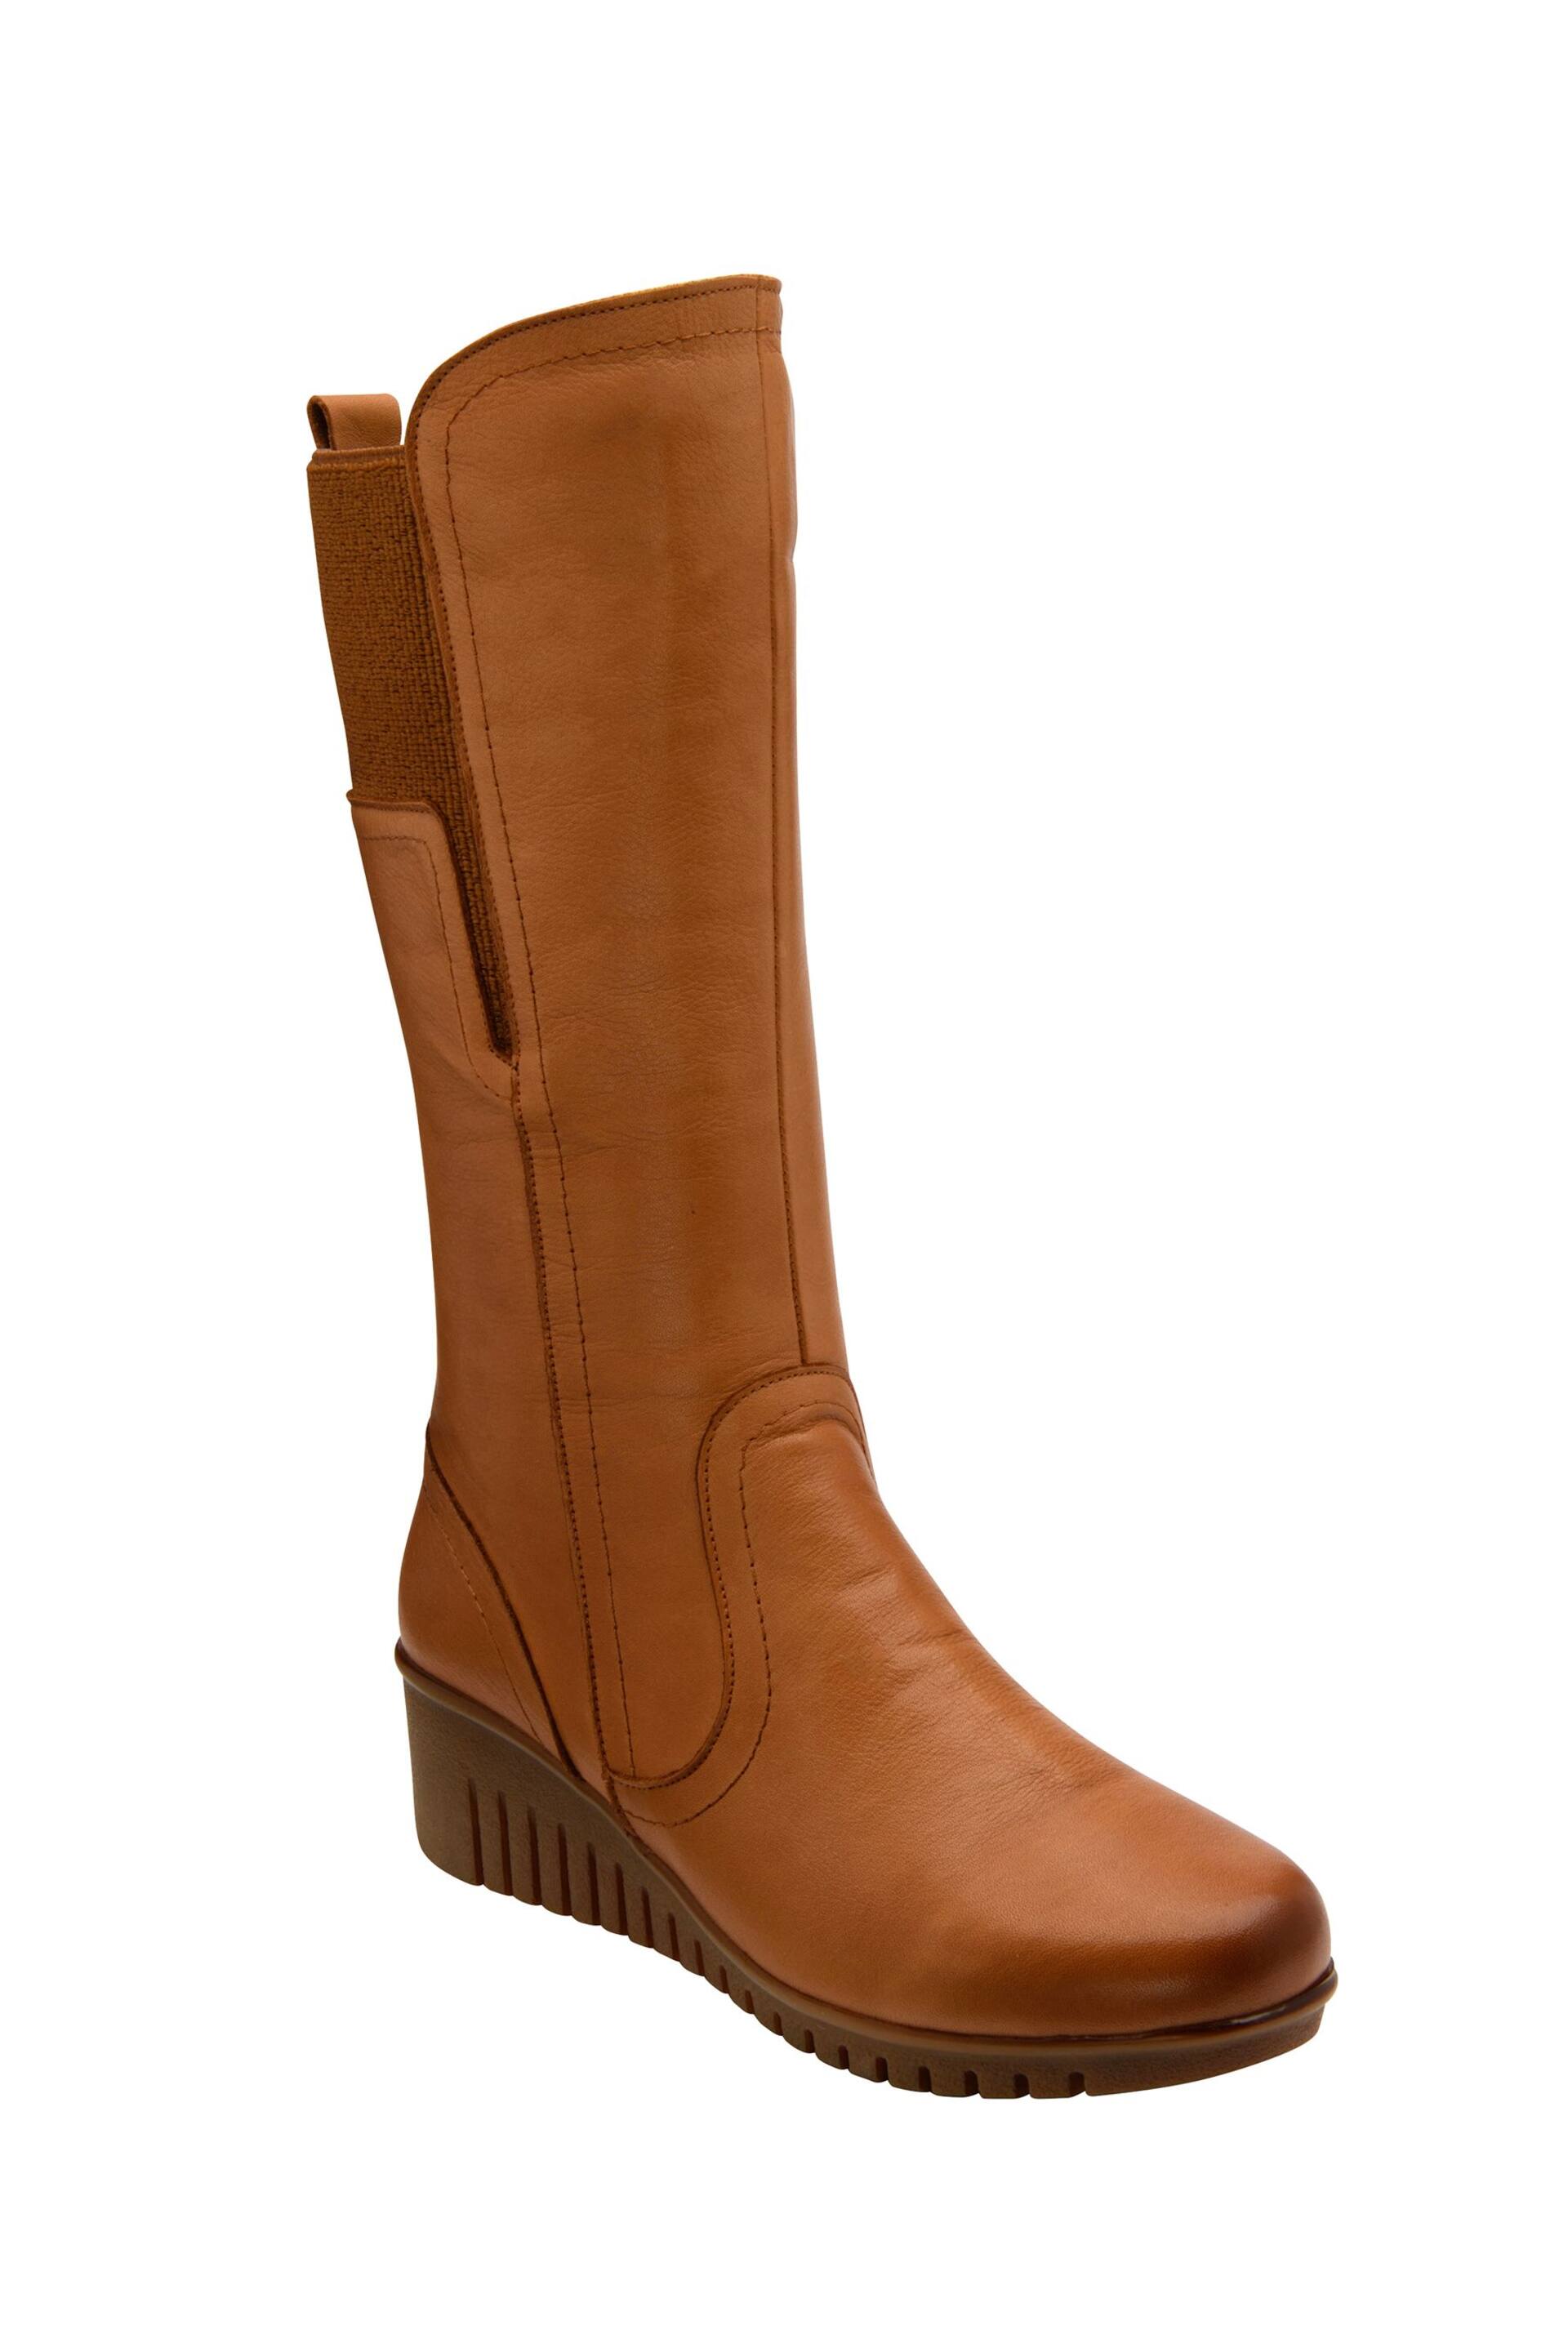 Lotus Brown Leather Wedge Knee-High Boots - Image 1 of 4